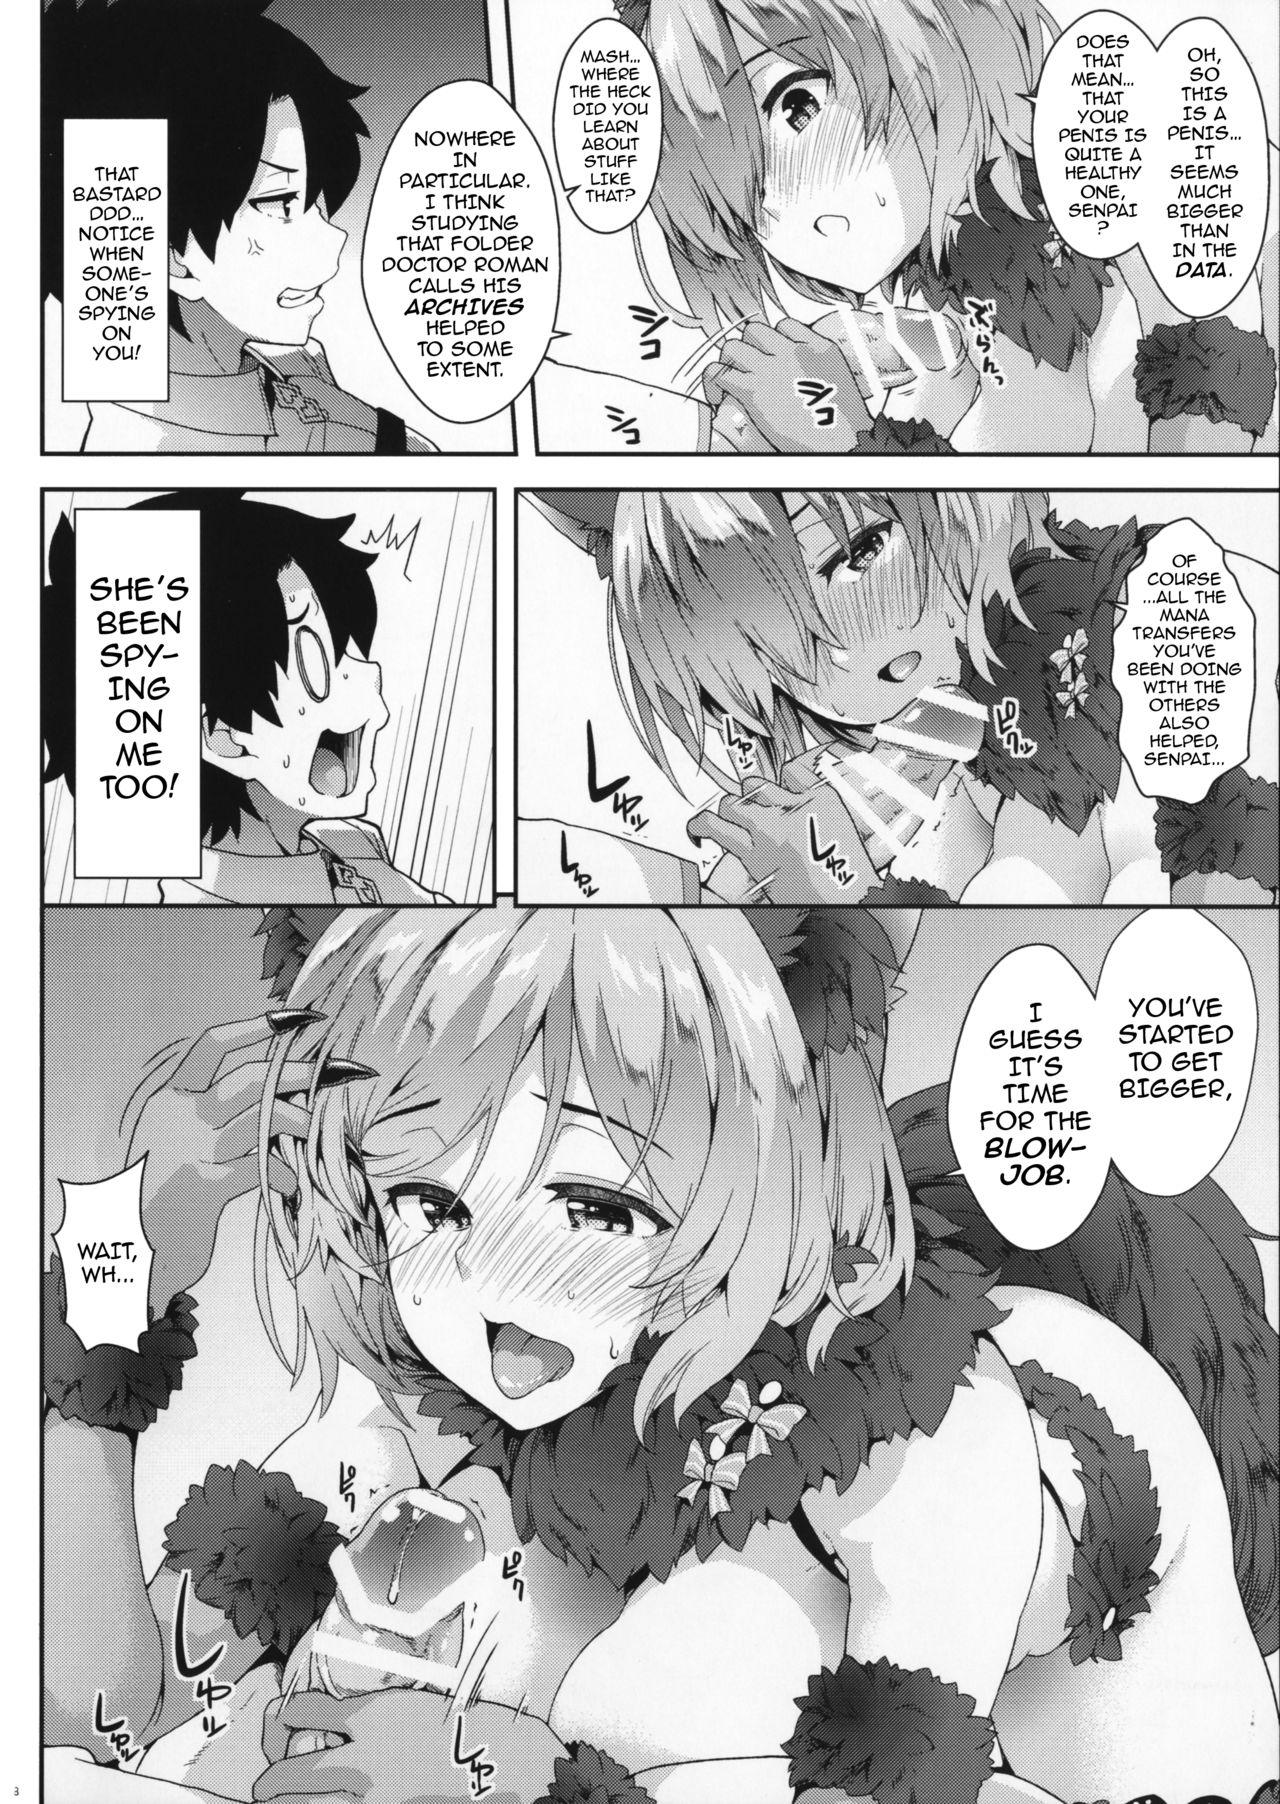 Riding Cock Why am I jealous of you? - Fate grand order Hot Pussy - Page 7